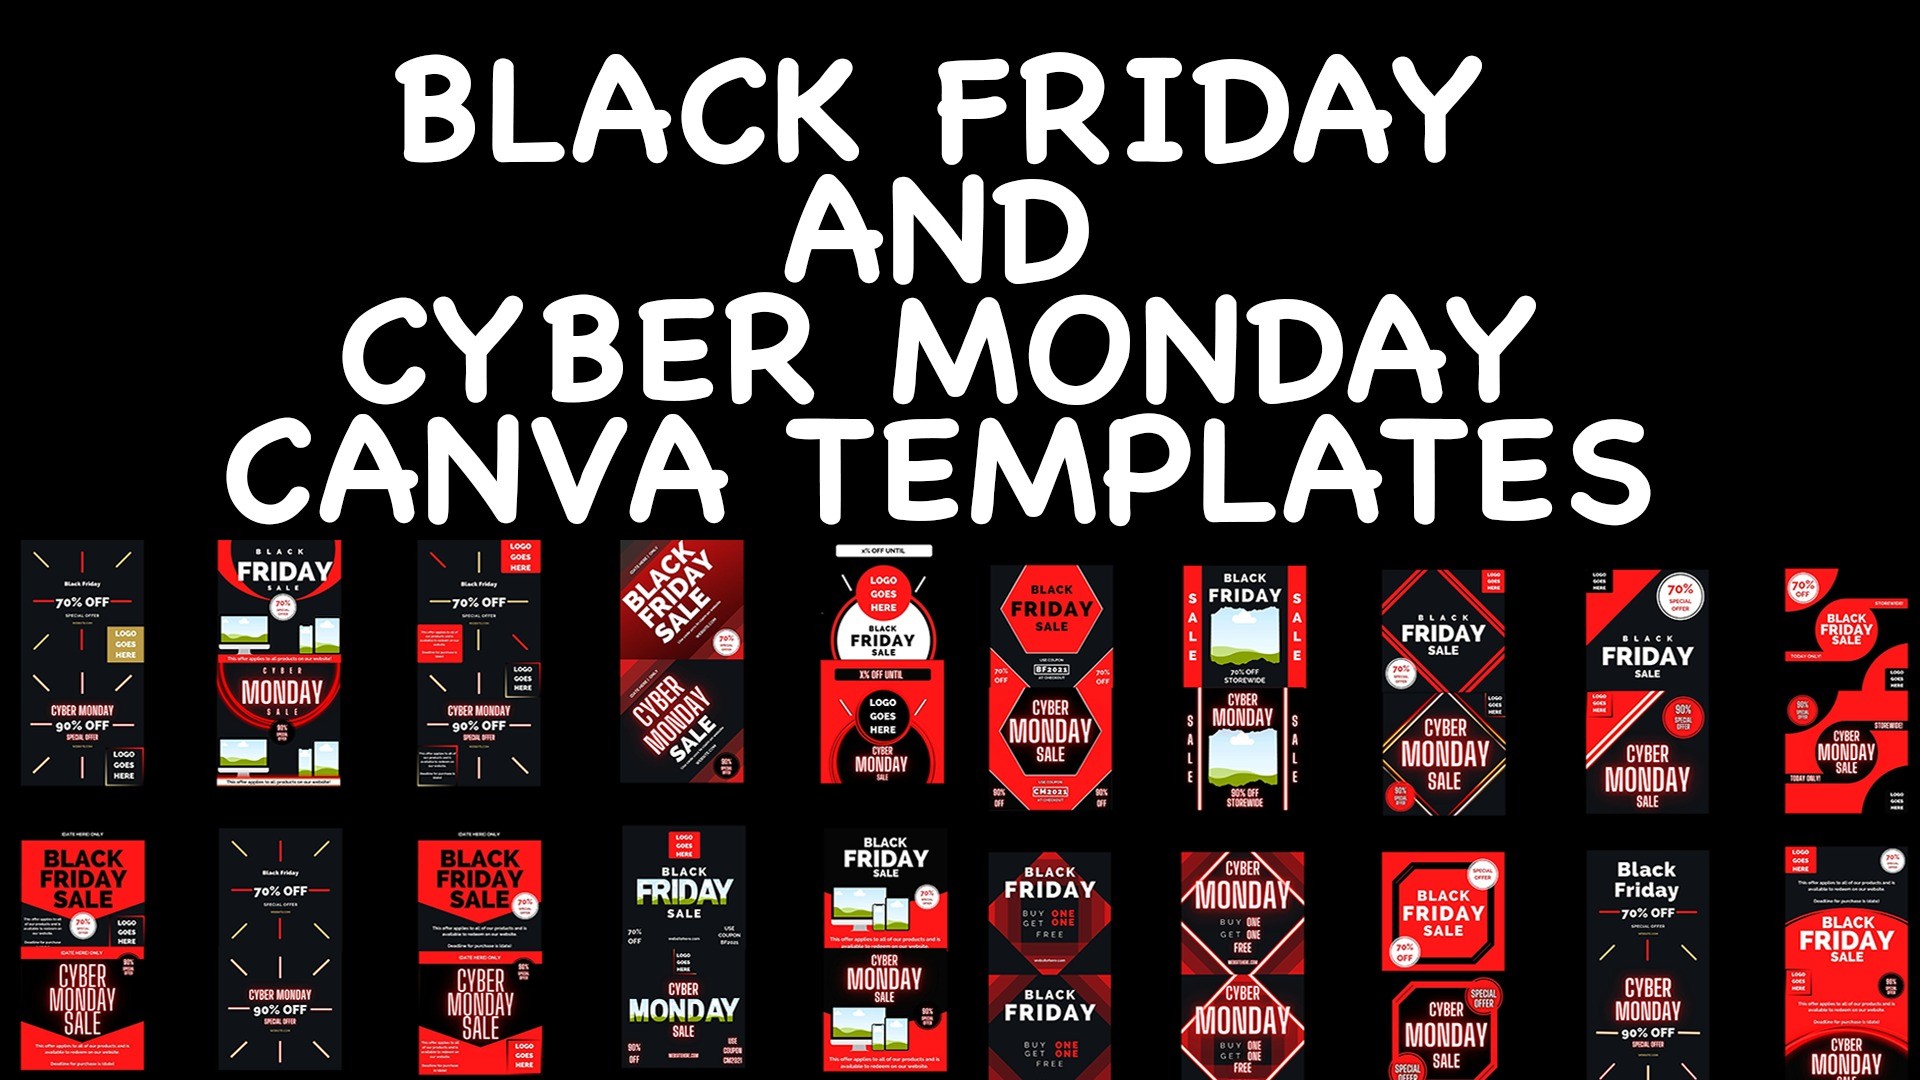 AppSumo Deal for Black Friday/Cyber Monday Canva Templates